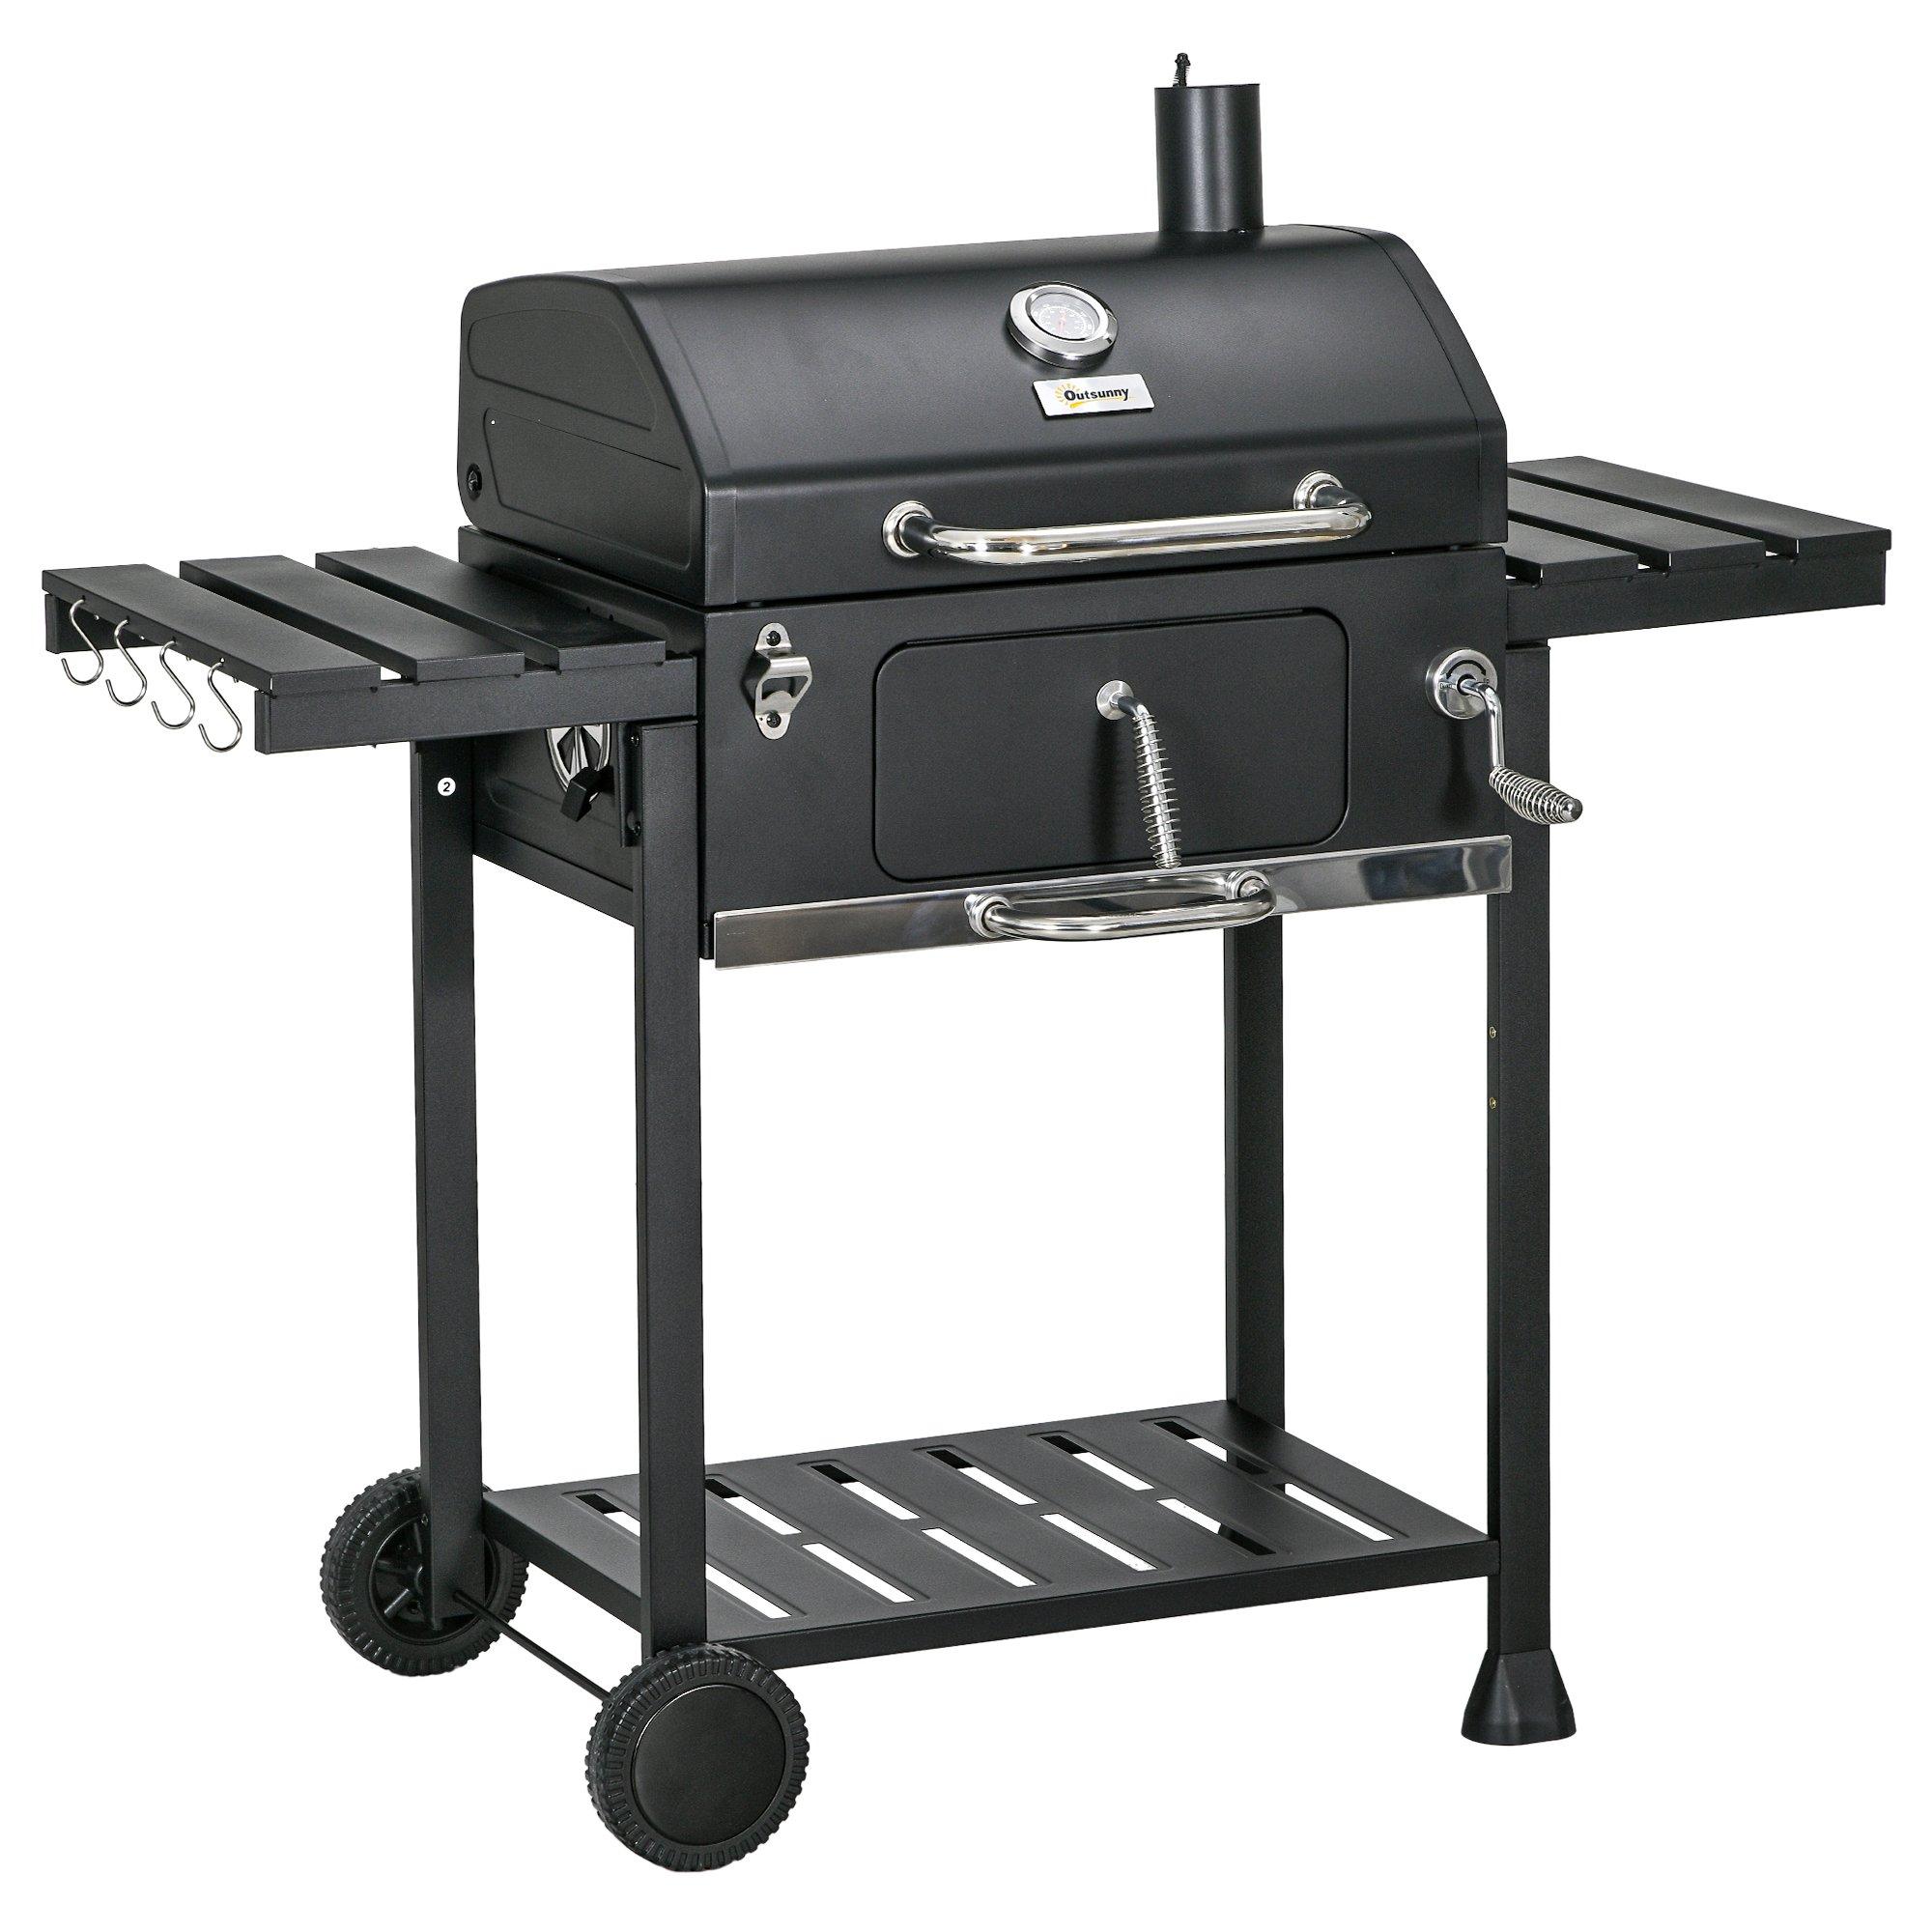 Charcoal BBQ Grill Smoker Trolley with Shelves, Bottle Opener